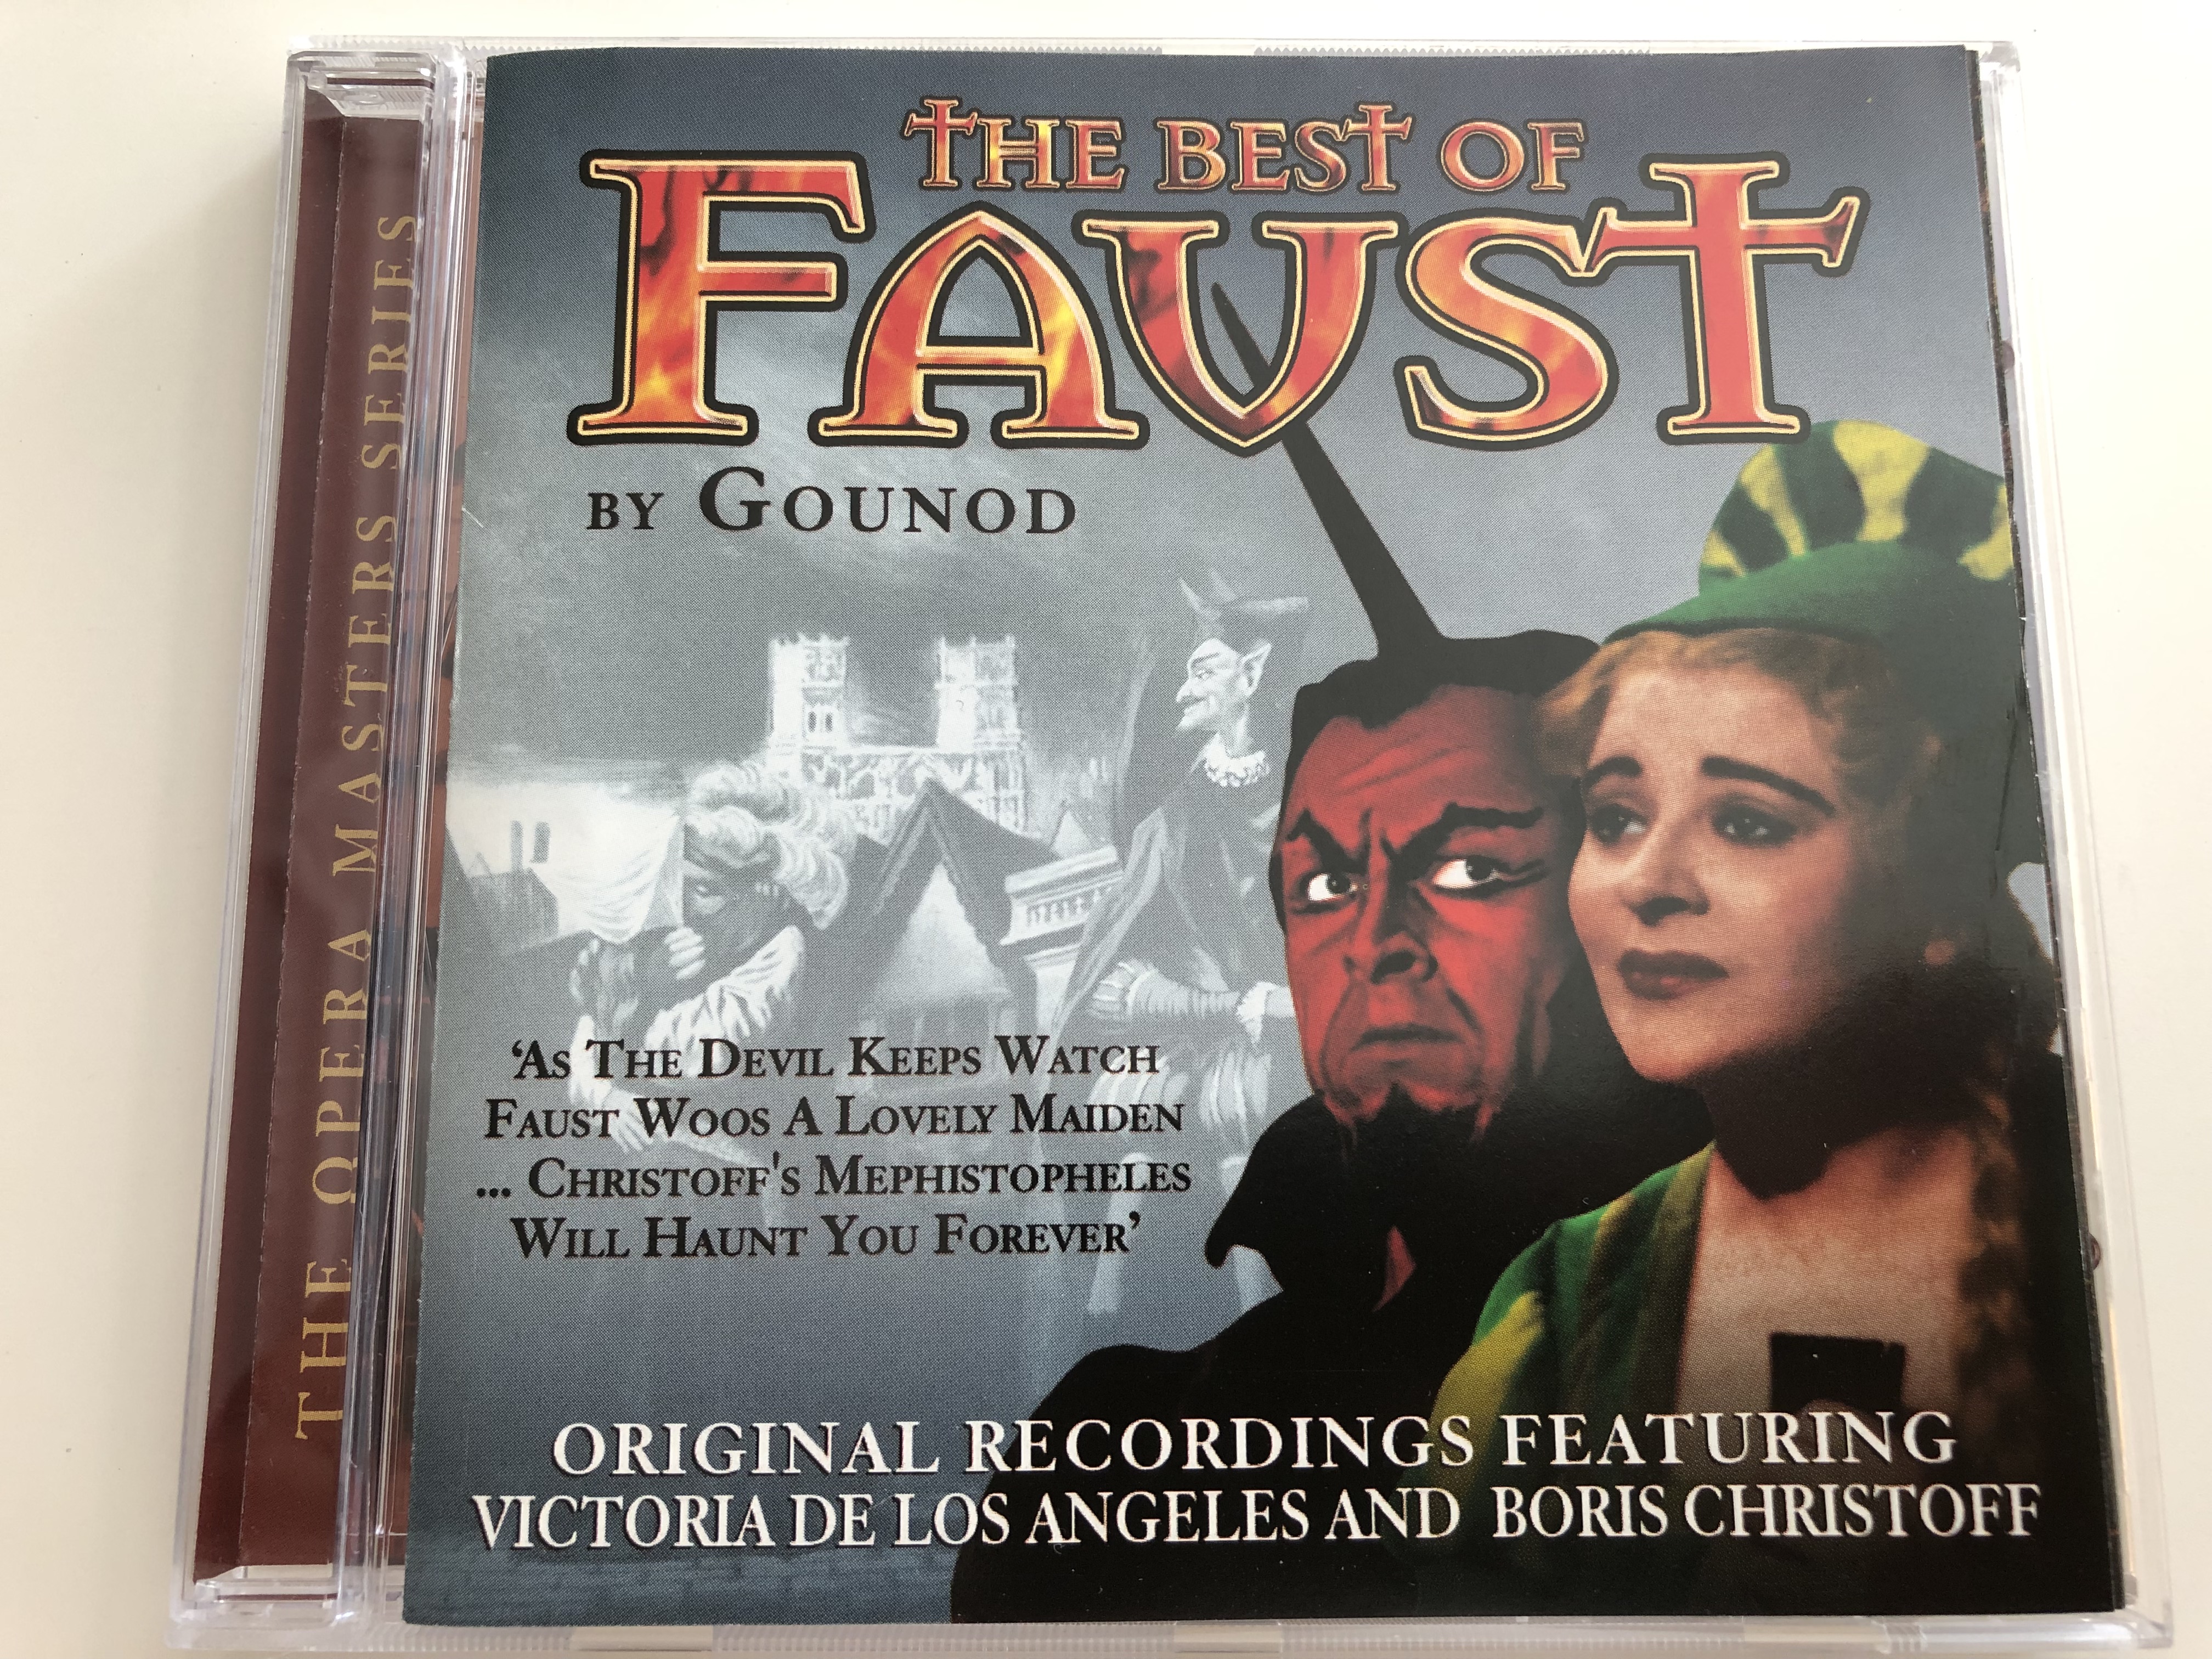 the-best-of-faust-by-gounod-original-recordings-featuring-victoria-de-los-angeles-and-boris-christoff-the-opera-masters-series-audio-cd-2005-platcd-1234-1-.jpg